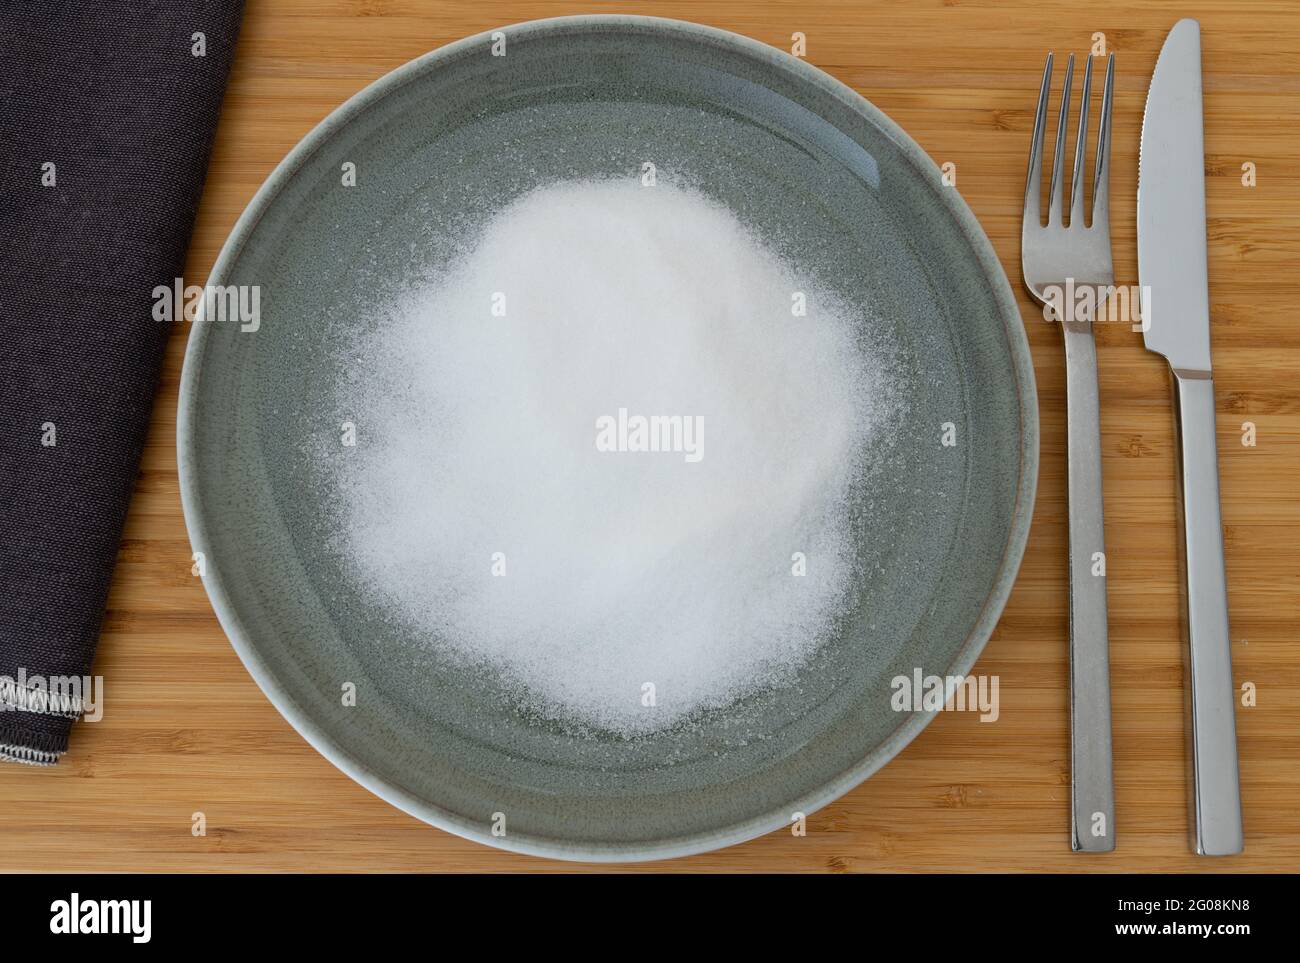 top view of white sugar on a plate as a concept for unhealthy nutrition Stock Photo